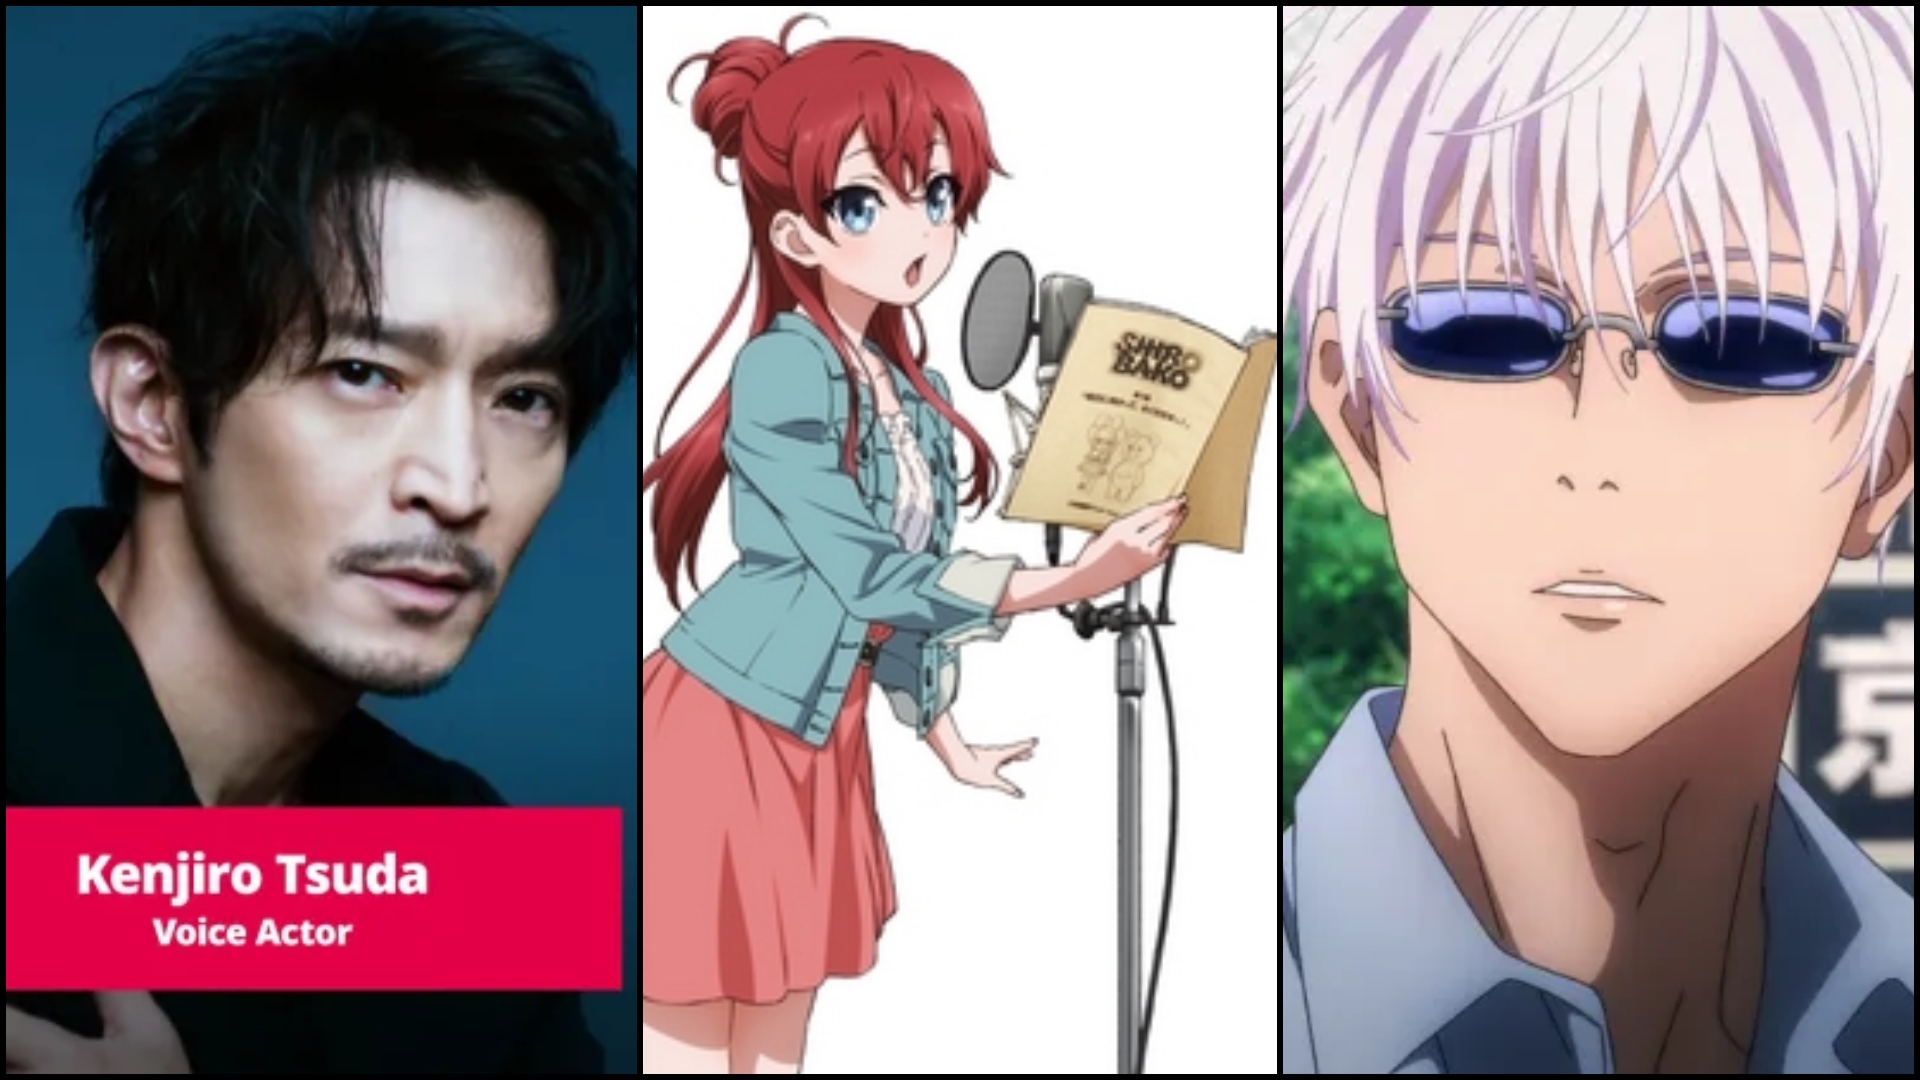 Kingdom Voice Actors Main Characters only with same voice  Japanese Seiyuu   Anime Media  Bilibili